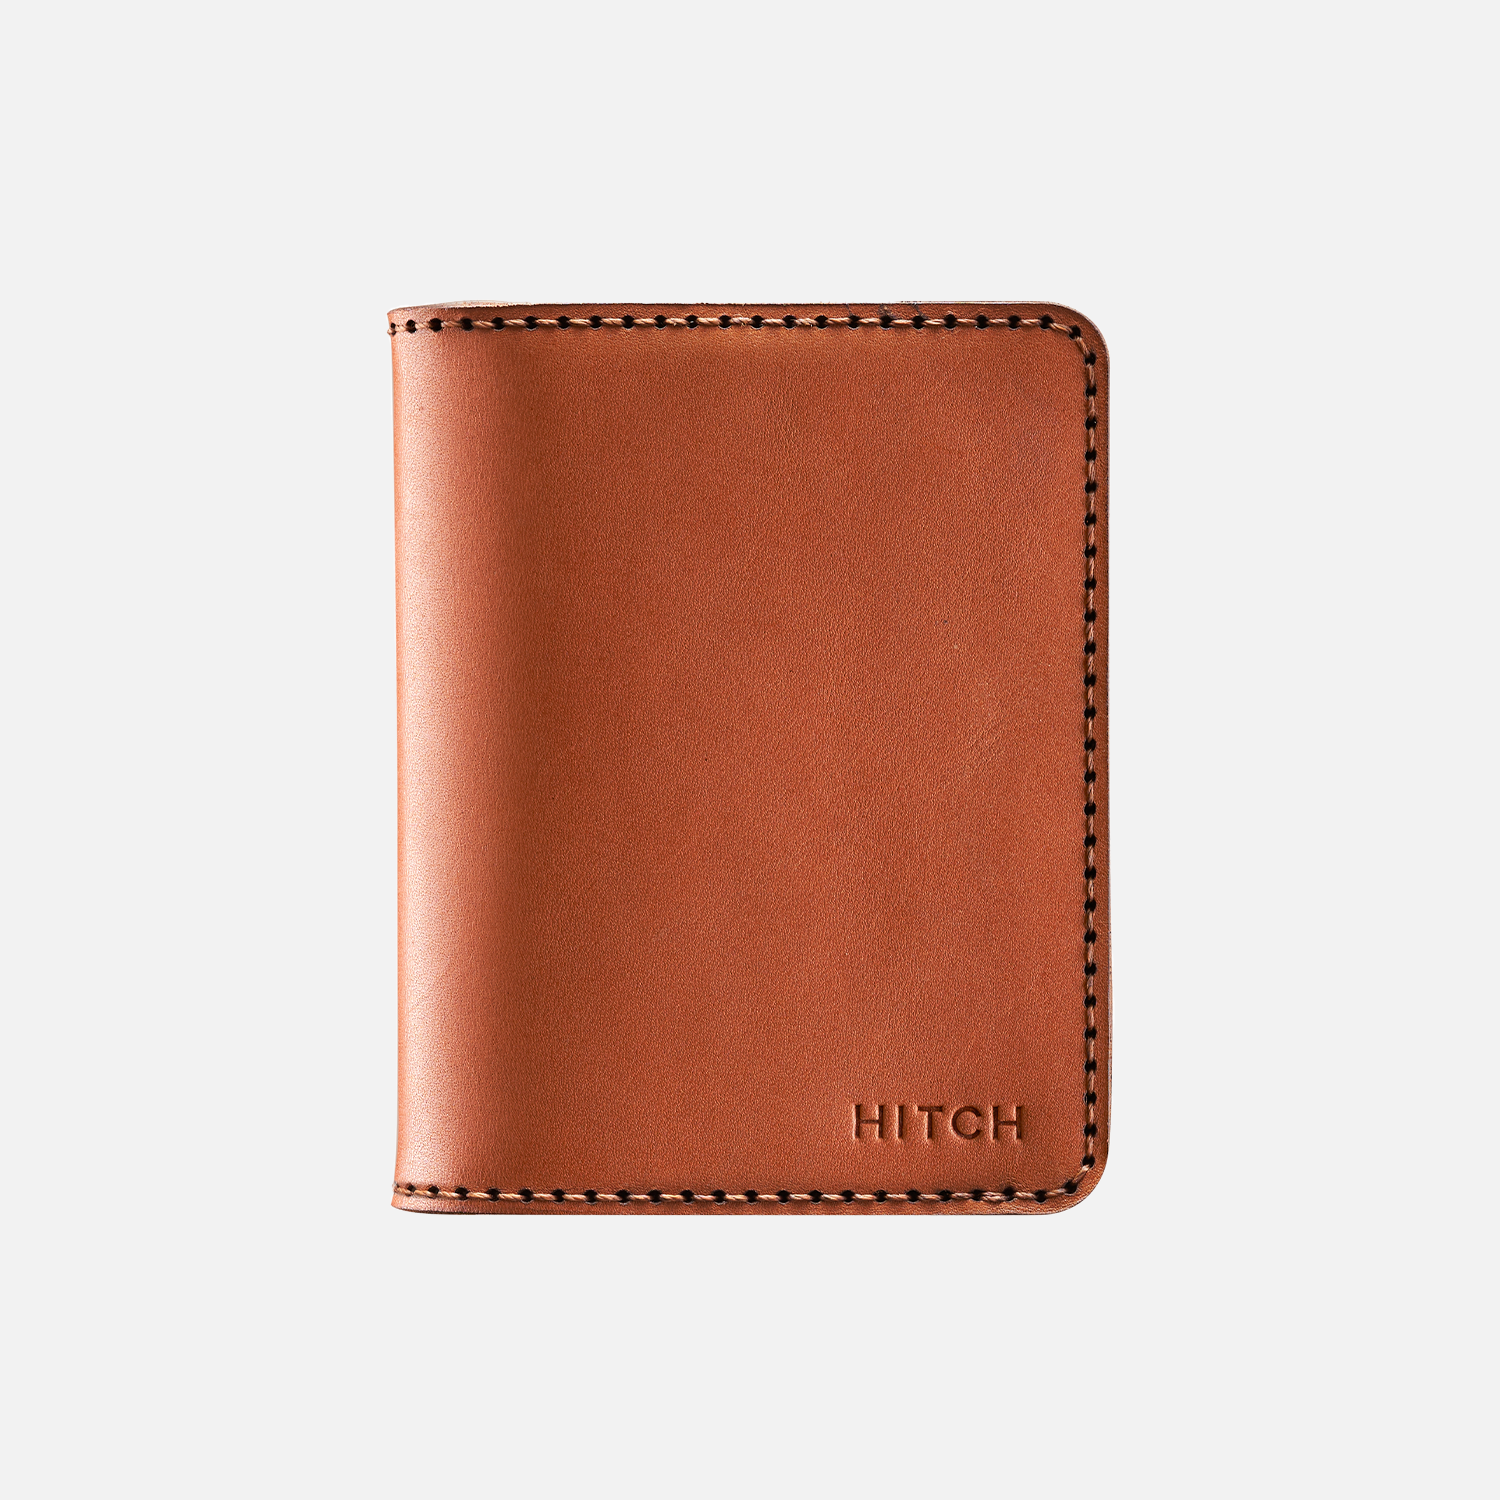 Brown leather bifold wallet with embossed "HITCH" logo and contrast stitching isolated on white background.